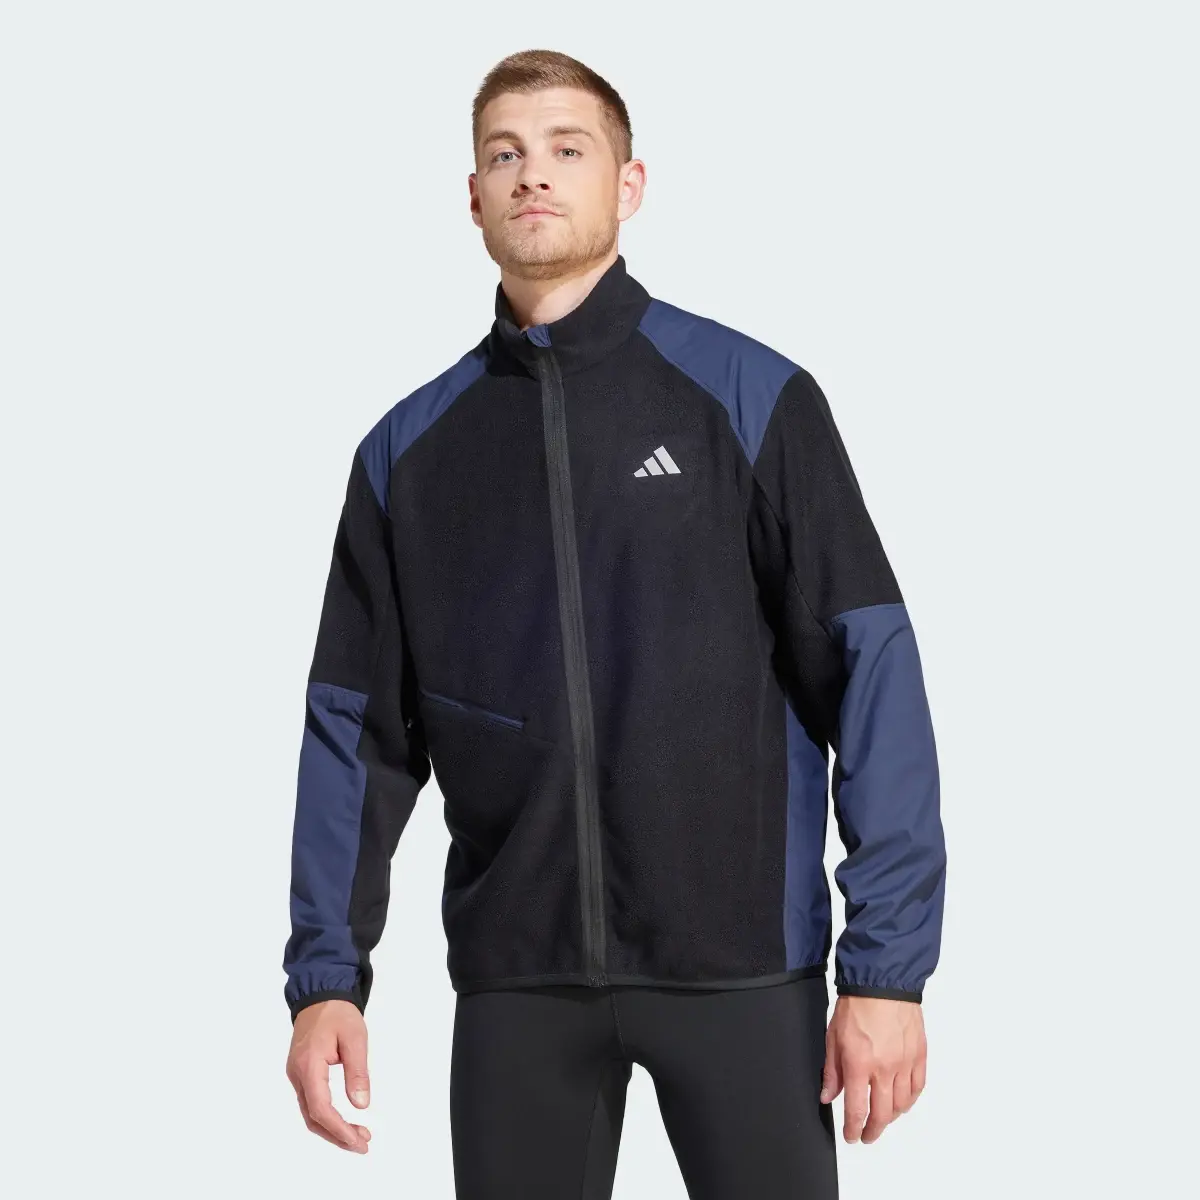 Adidas Ultimate Running Conquer the Elements Jacket. 2